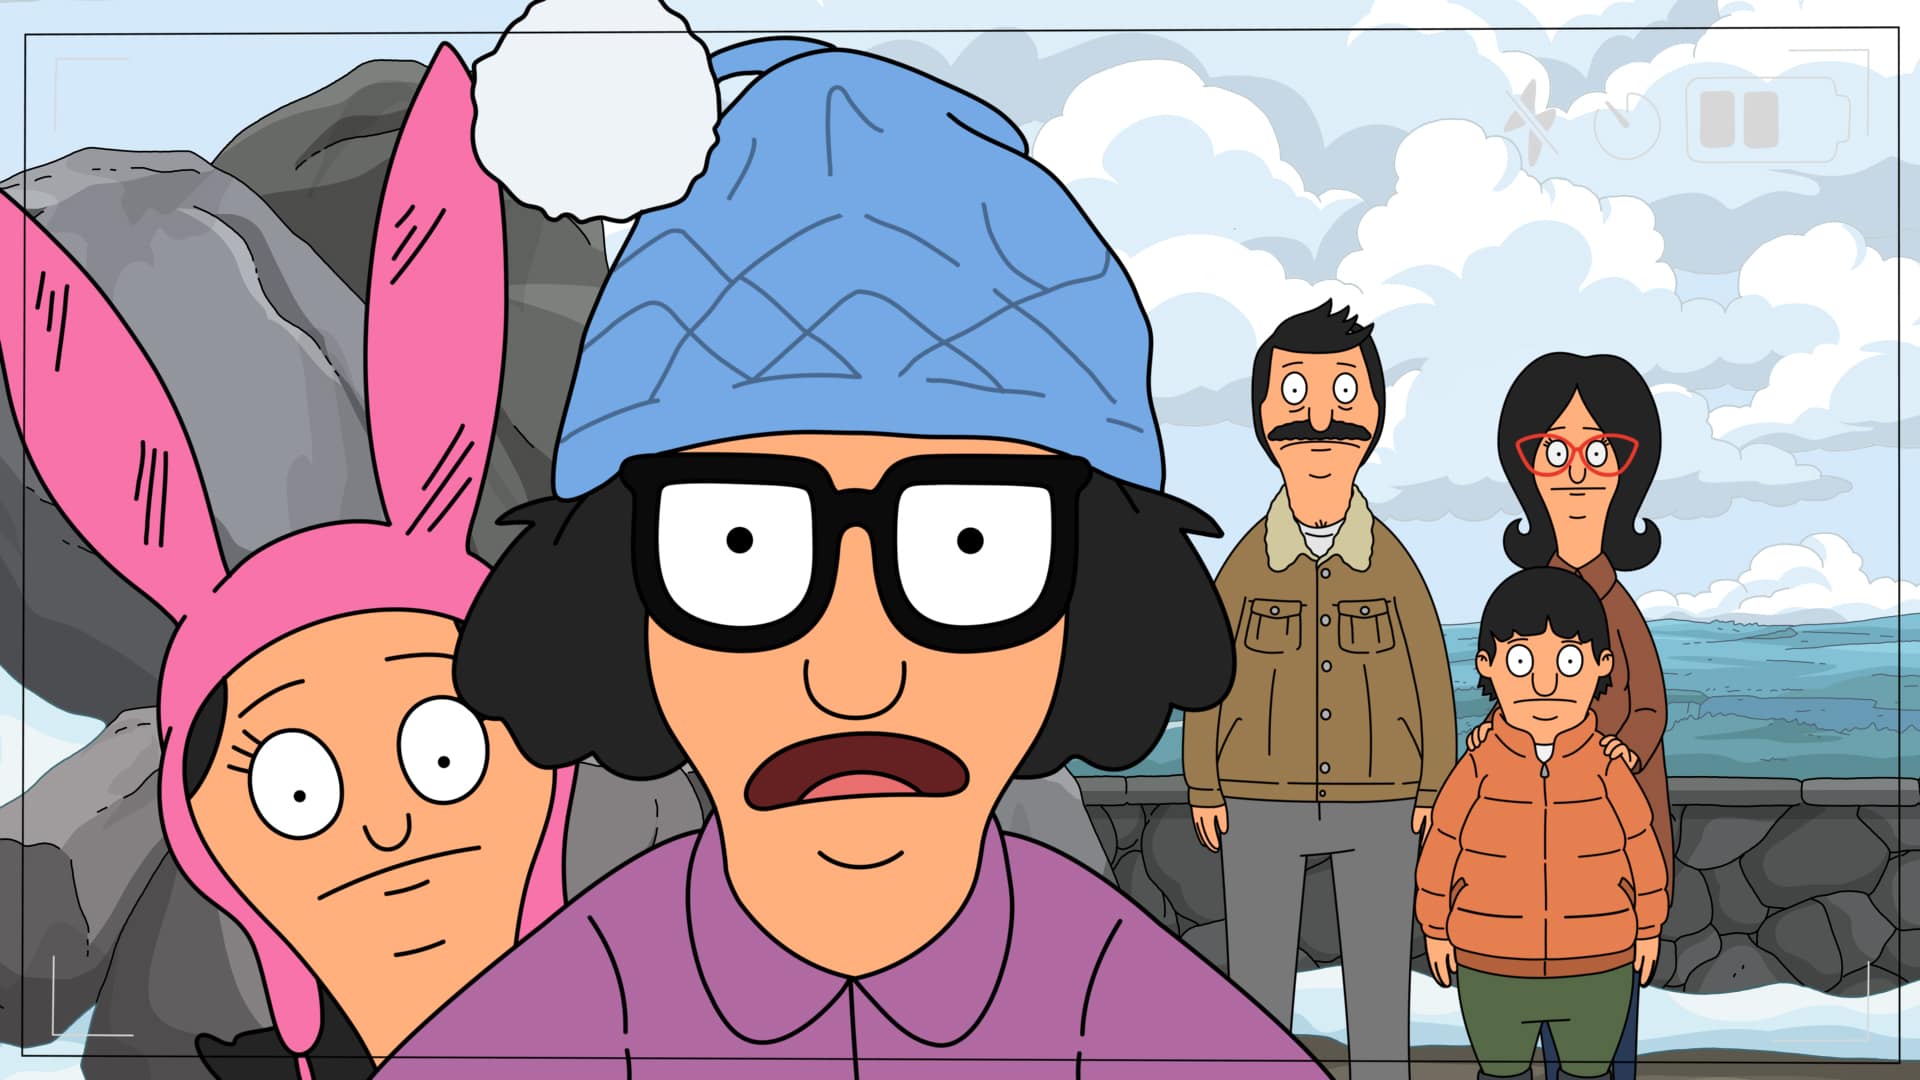 BOB'S BURGERS: Linda drags Bob and the kids out into nature, determined to take the best holiday family portrait ever in the "Die Card, or Card Trying" episode of BOBS BURGERS airing Sunday, Feb. 28 (9:00-9:30 PM ET/PT) on FOX. BOBS BURGERS © 2021 by 20th Television.